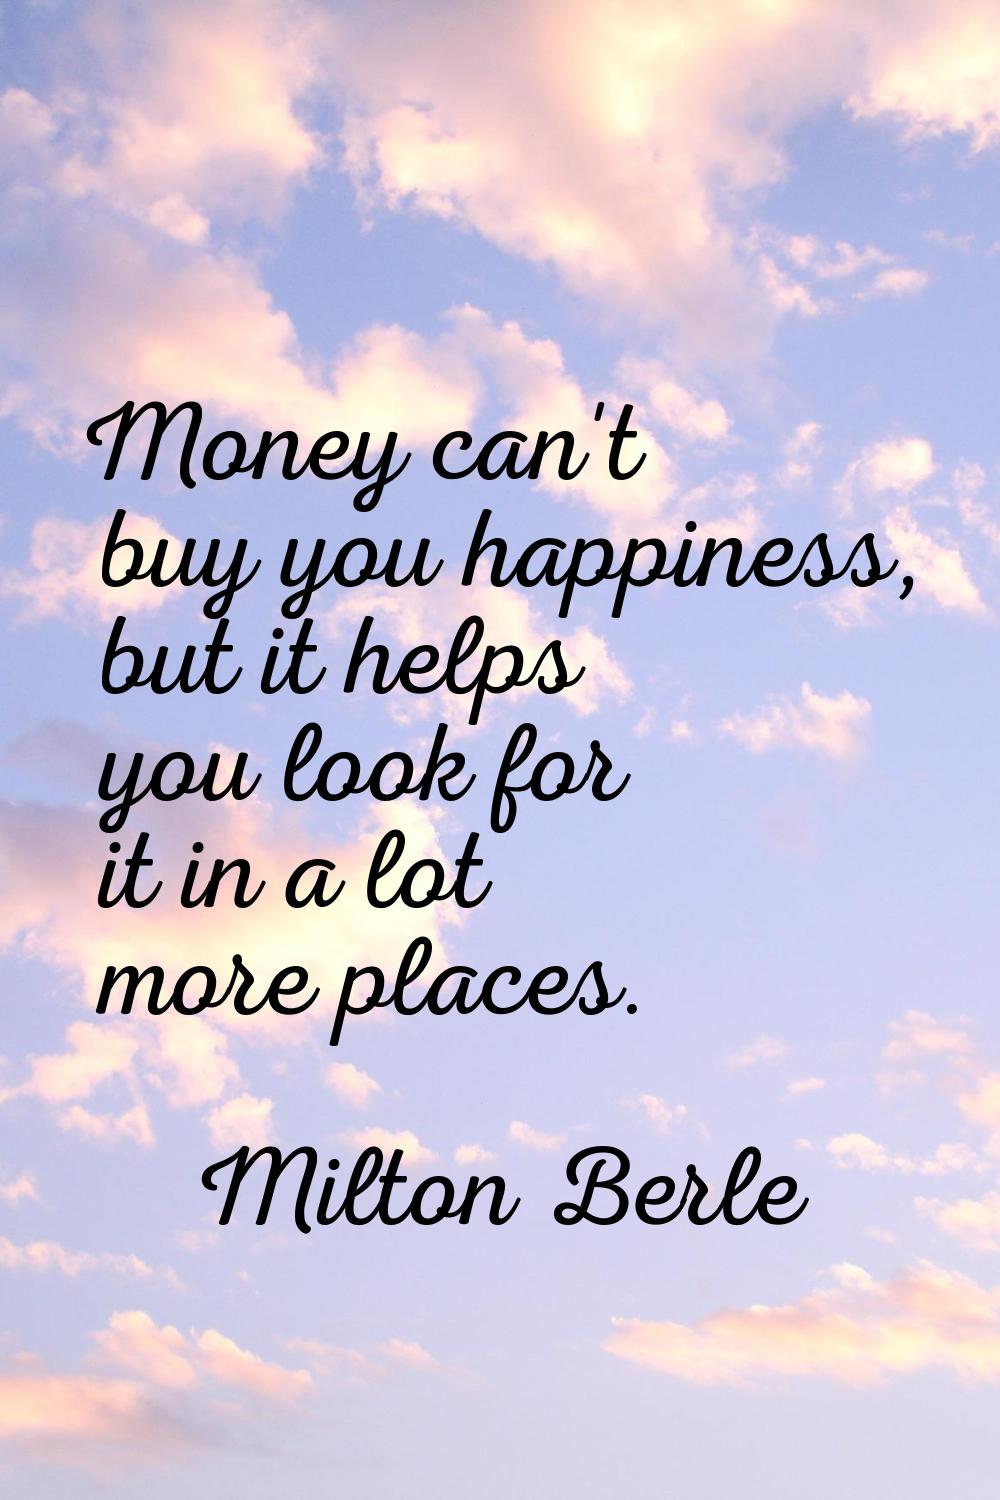 Money can't buy you happiness, but it helps you look for it in a lot more places.